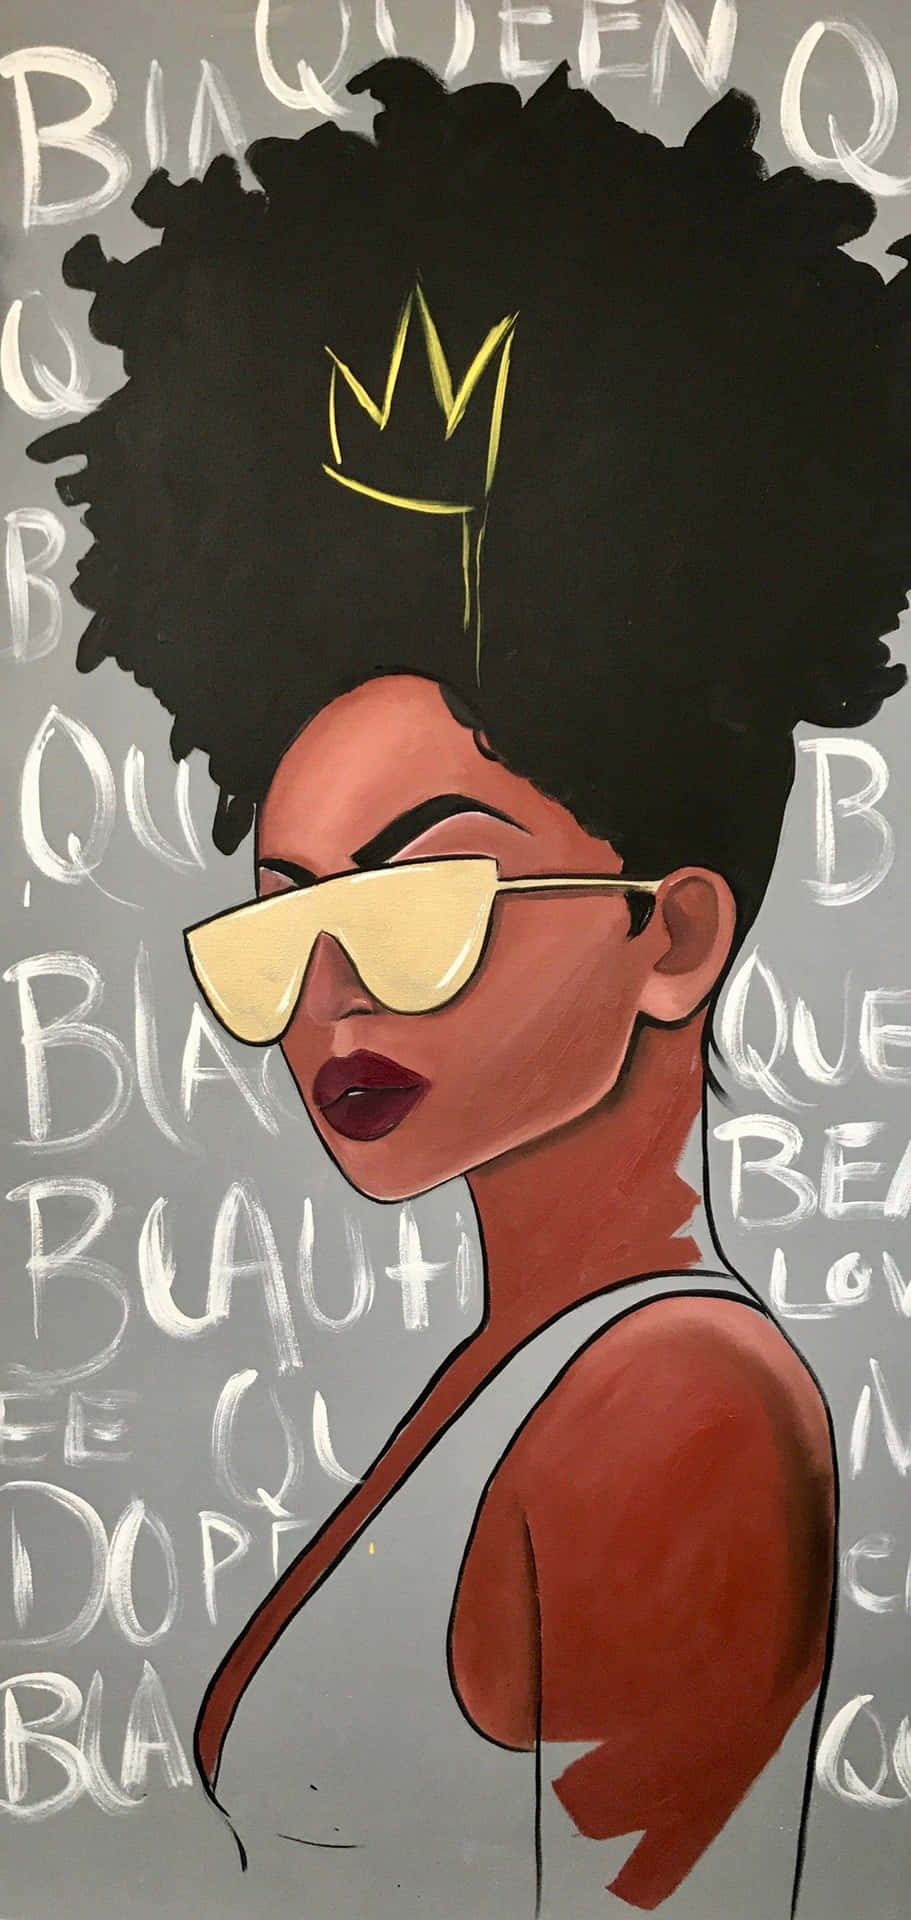 "A tribute to black baddies everywhere - never give up on yourself and keep pushing for what you want." Wallpaper